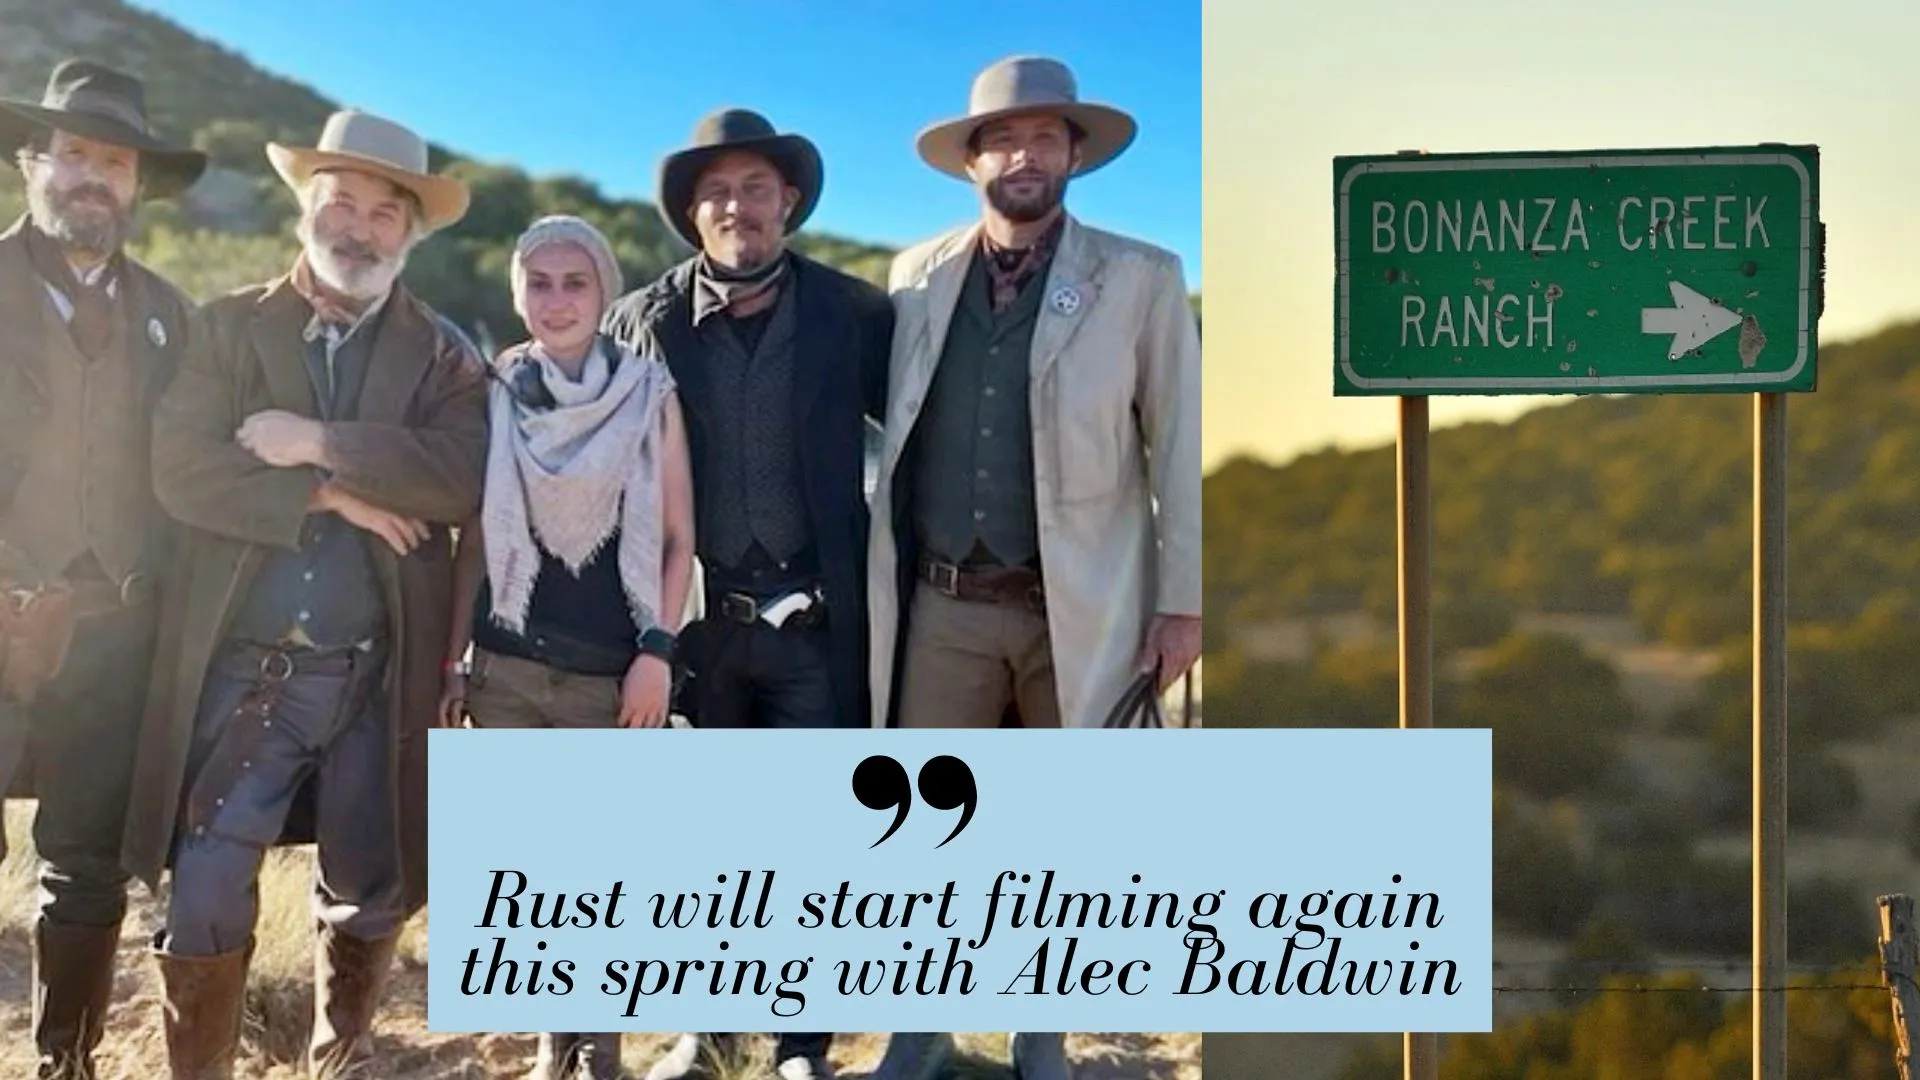 Rust will start filming again this spring with Alec Baldwin (Image credit: hollywoodreporter)